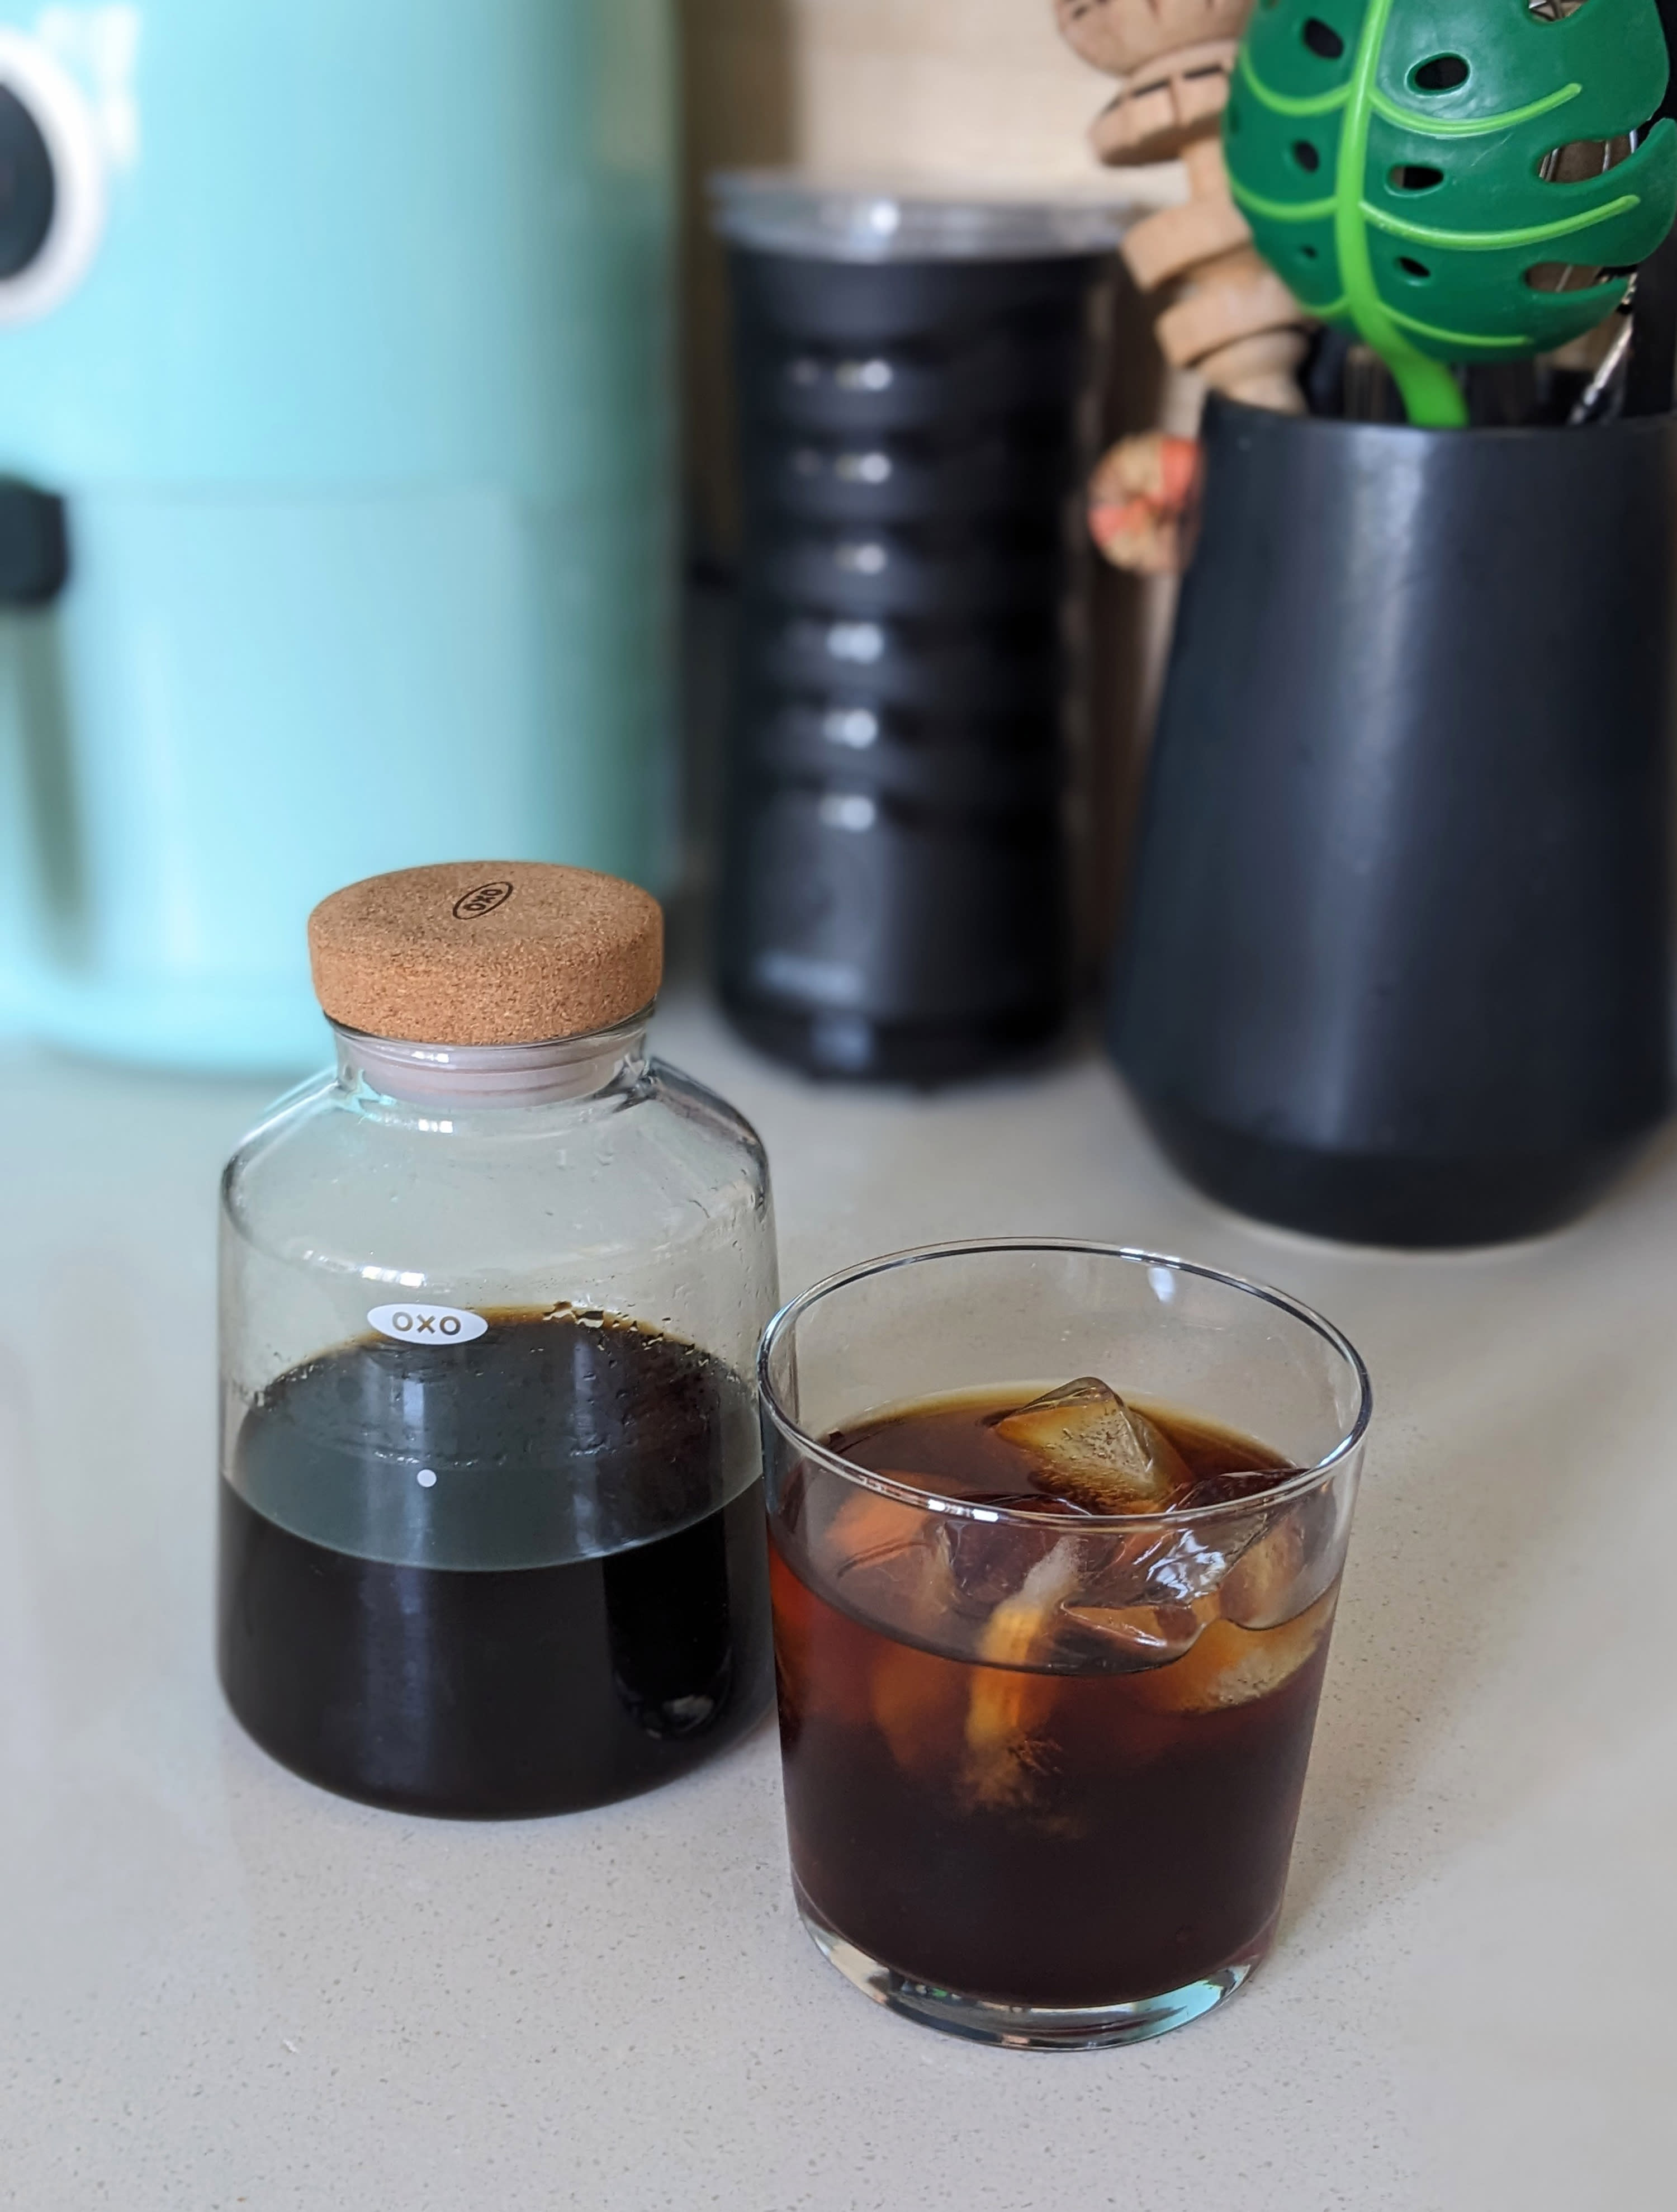 https://cdn.apartmenttherapy.info/image/upload/v1690835392/k/shopping/2023-07/oxo-brew-compact-cold-brew-coffee-maker-review/oxo-brew-compact-cold-brew-coffee-maker-review-7957.jpg